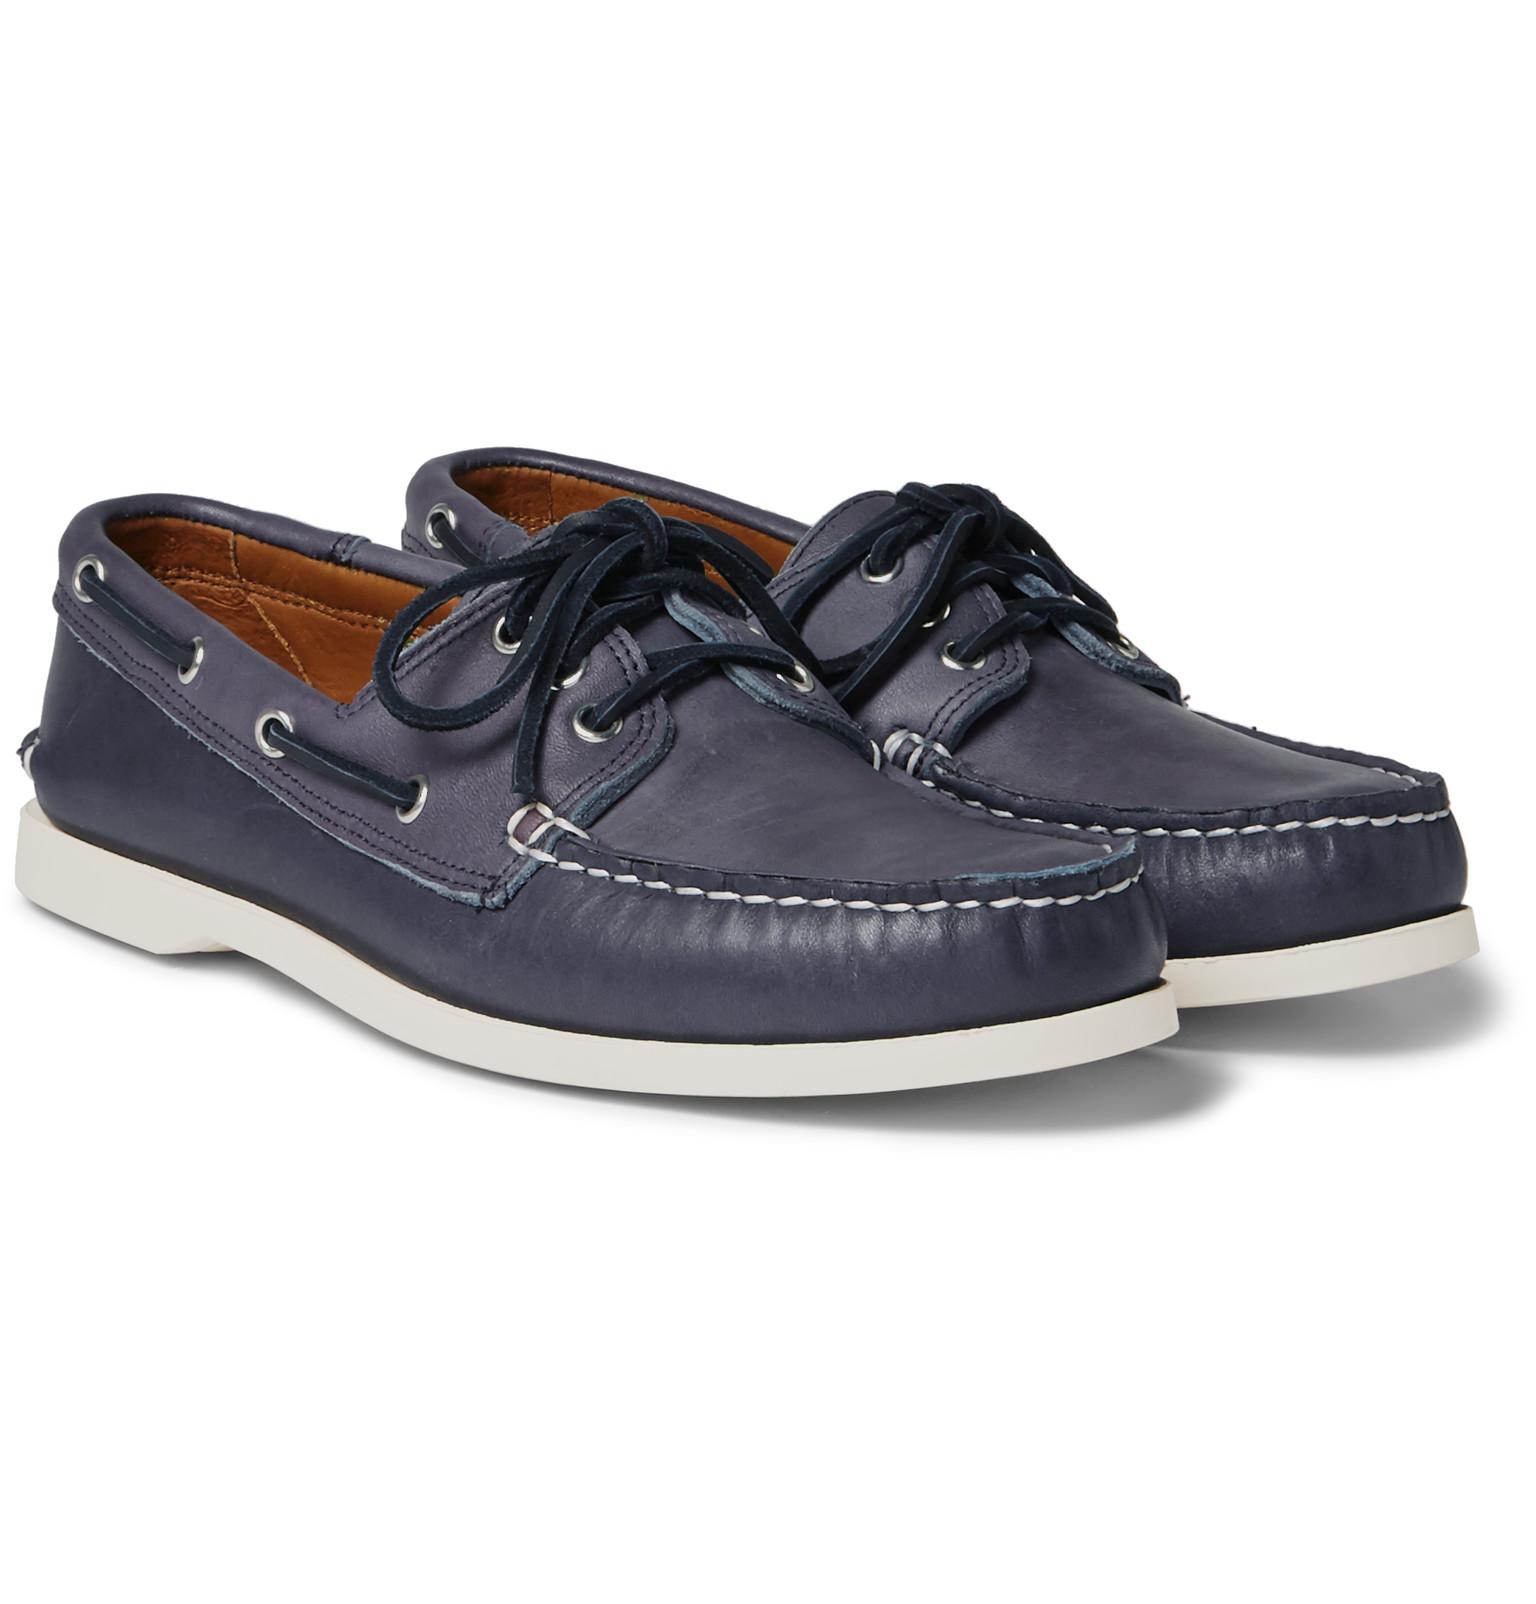 Quoddy Downeast Leather Boat Shoes in 